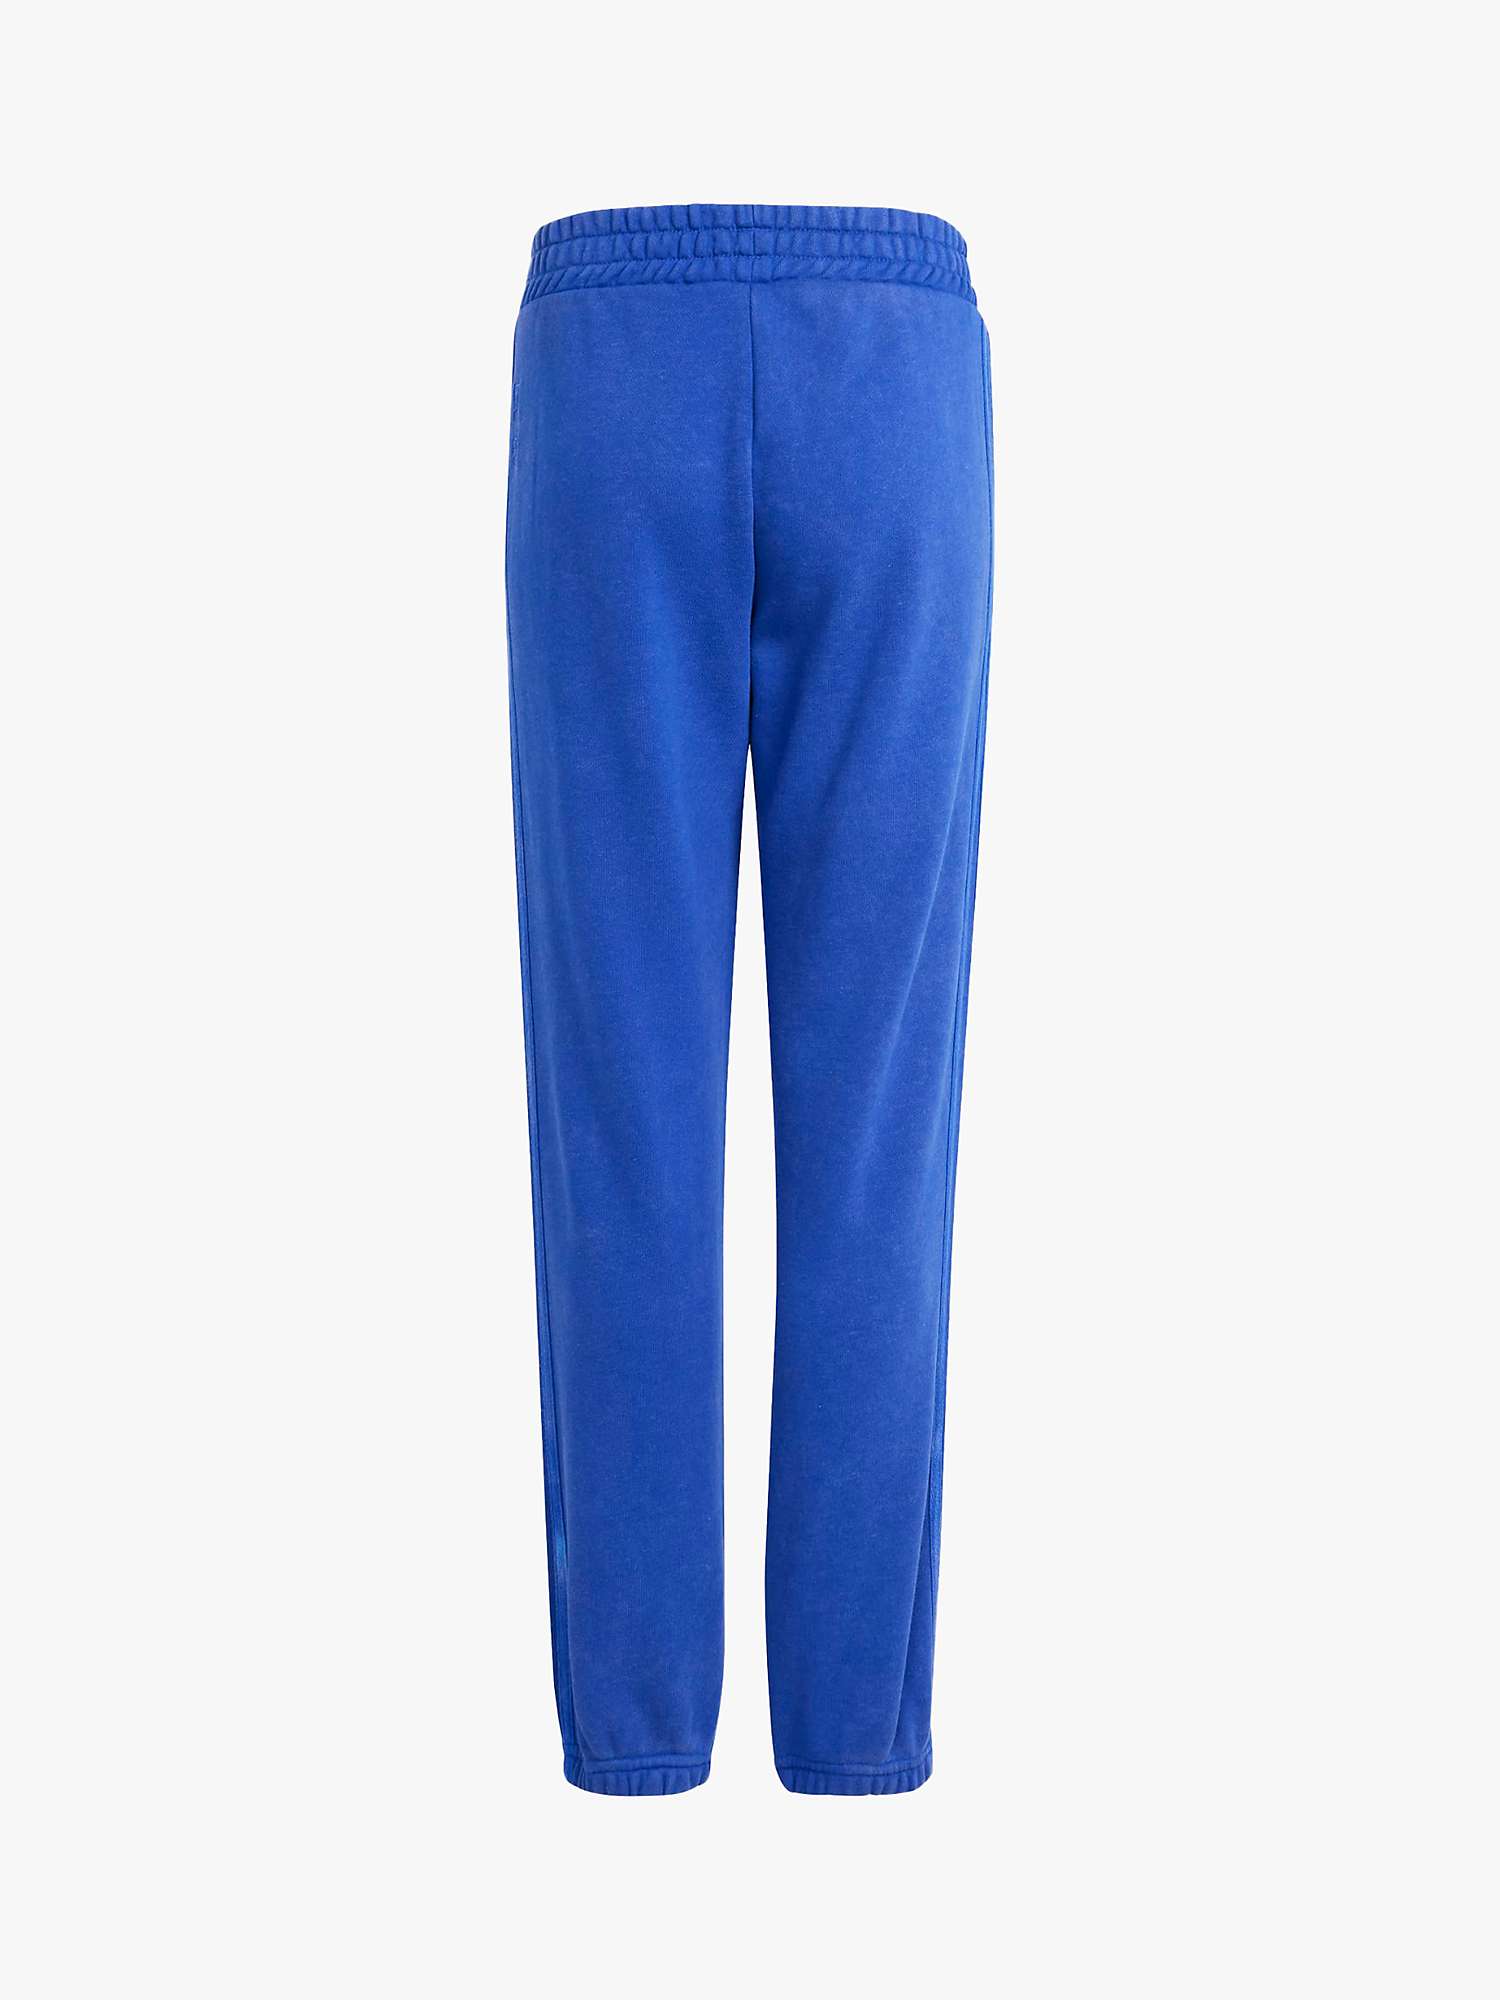 Buy adidas Kids' All Szn Washed Joggers, Selubl Online at johnlewis.com